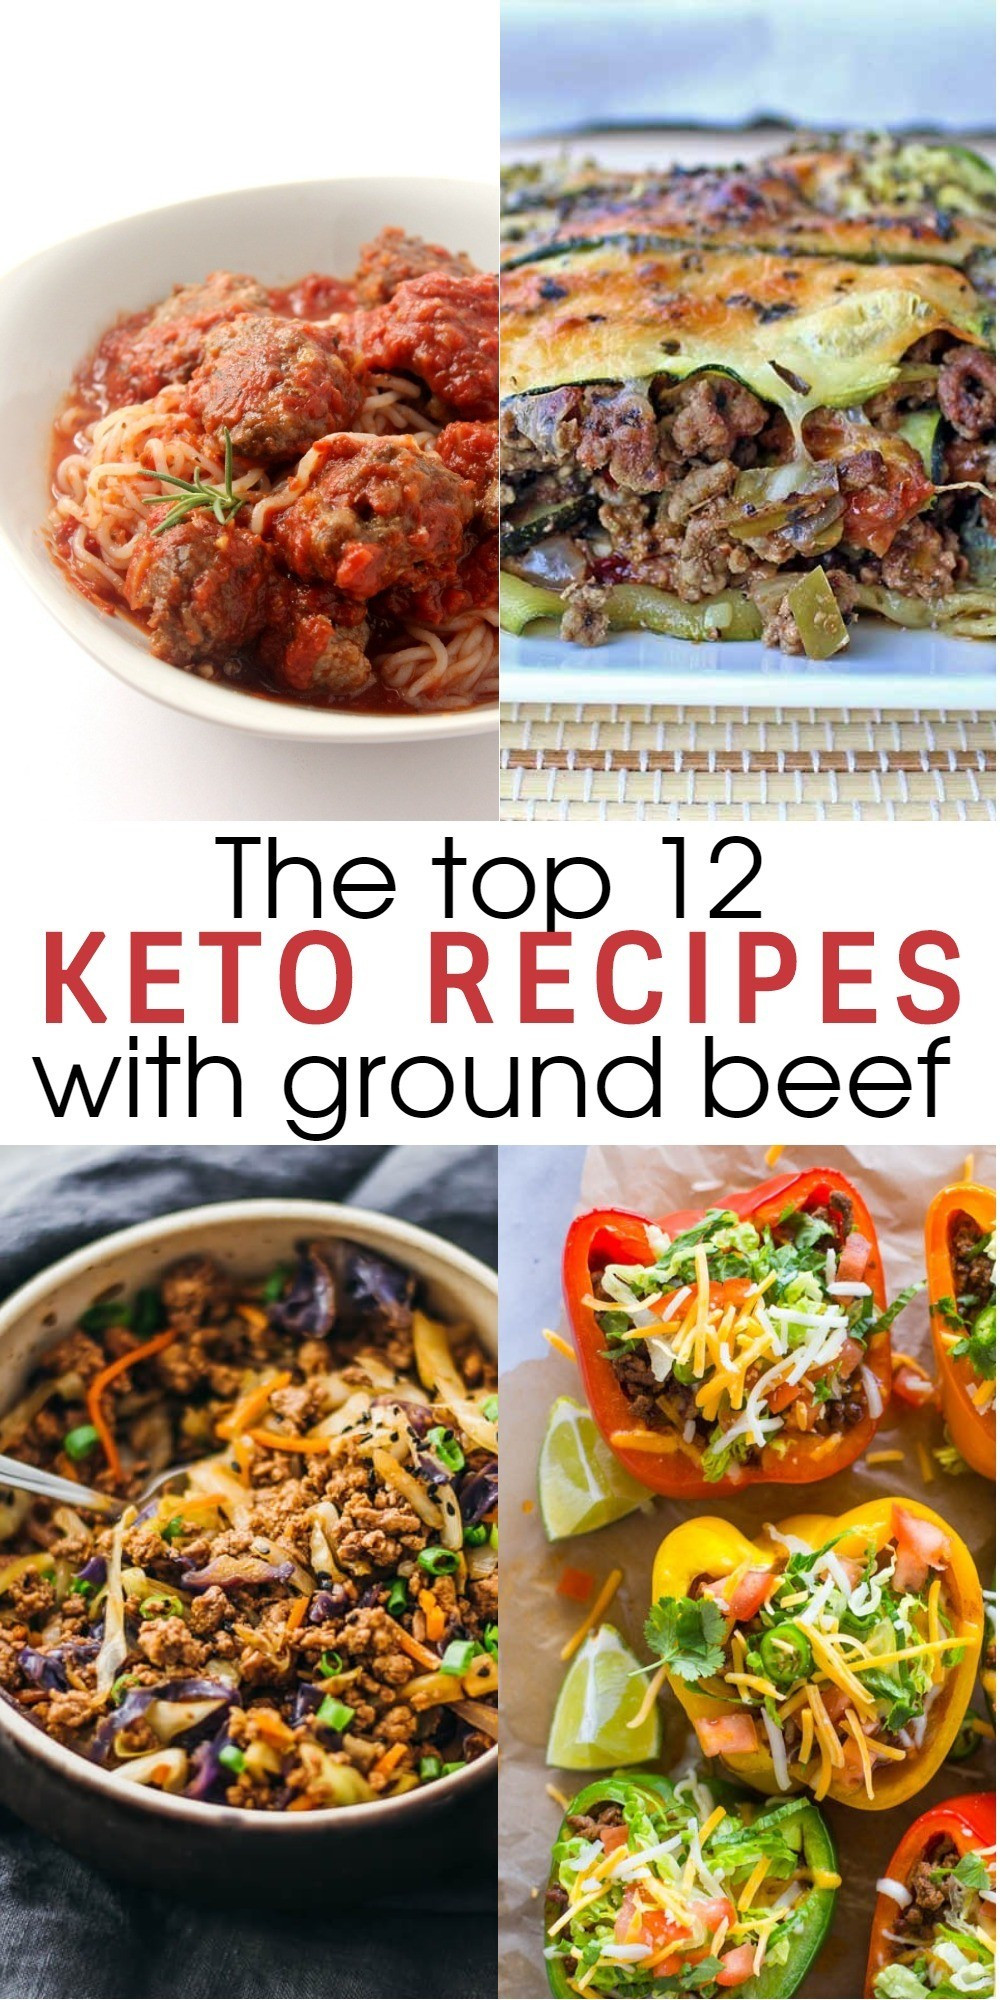 Ground Beef Keto Recipes Videos
 12 Flavorful and Easy Keto Recipes With Ground Beef To Try